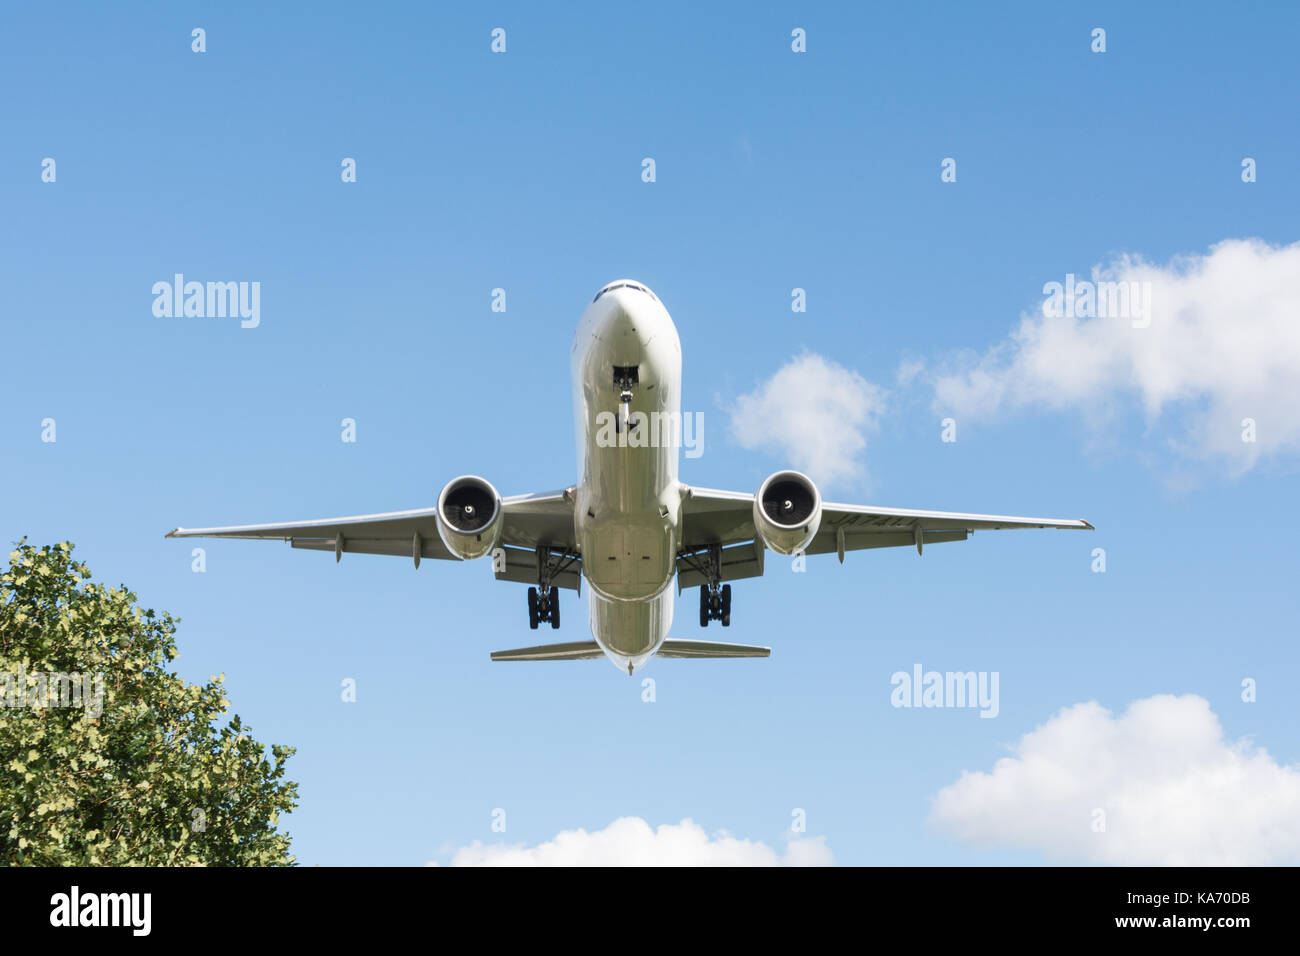 A low flying jet aircraft descending towards Heathrow Airport, Terminal 4, in Hounslow, Middlesex, UK. Stock Photo